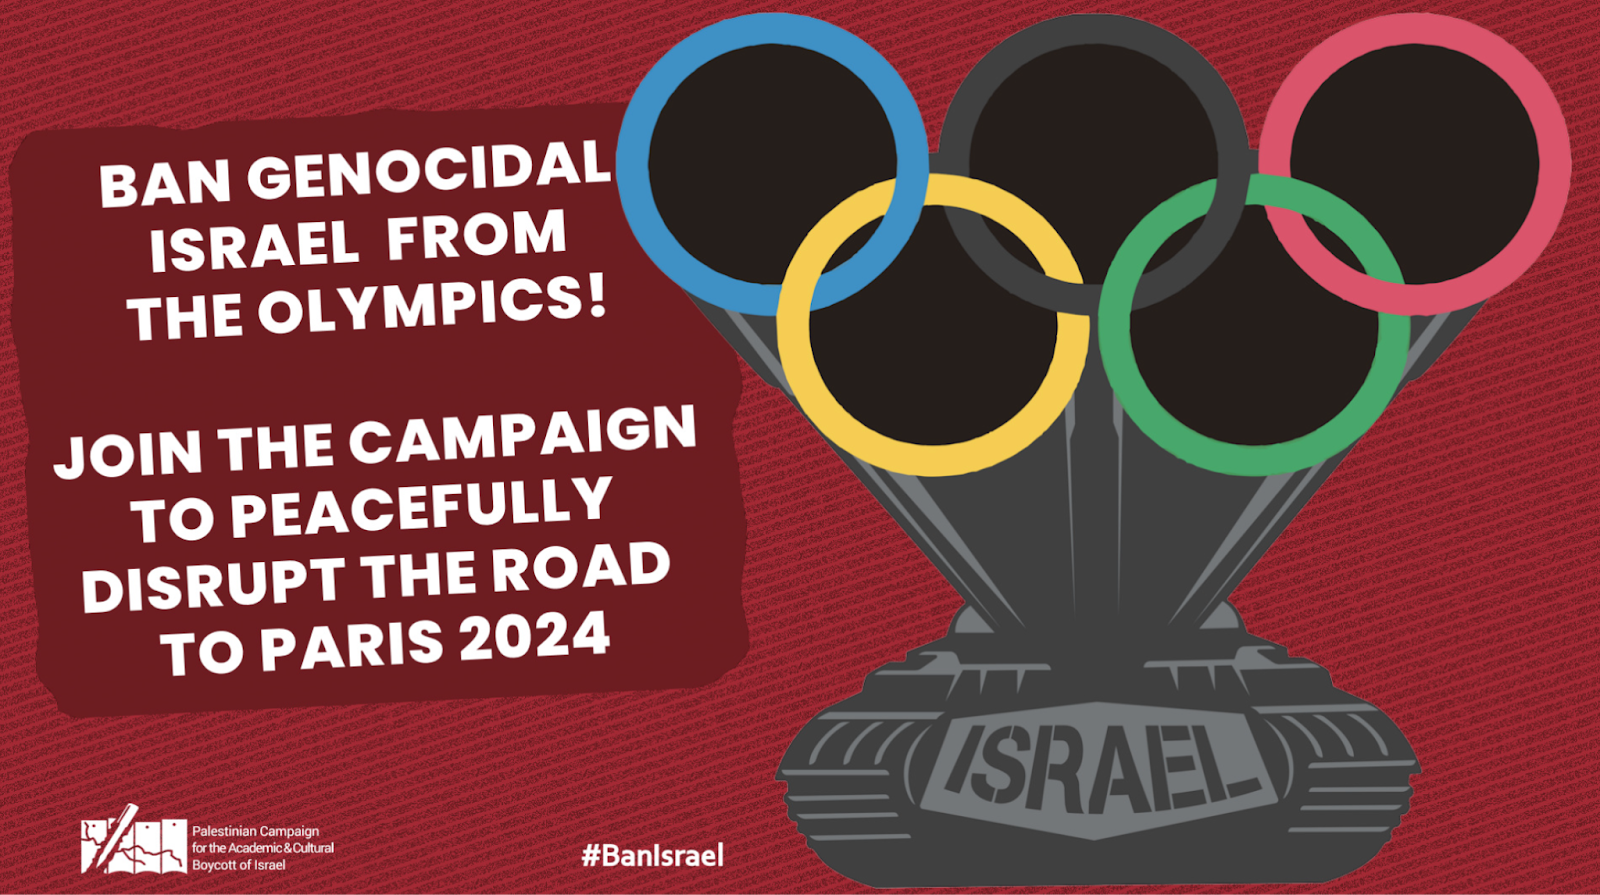 Ban Israel From Olympics Image